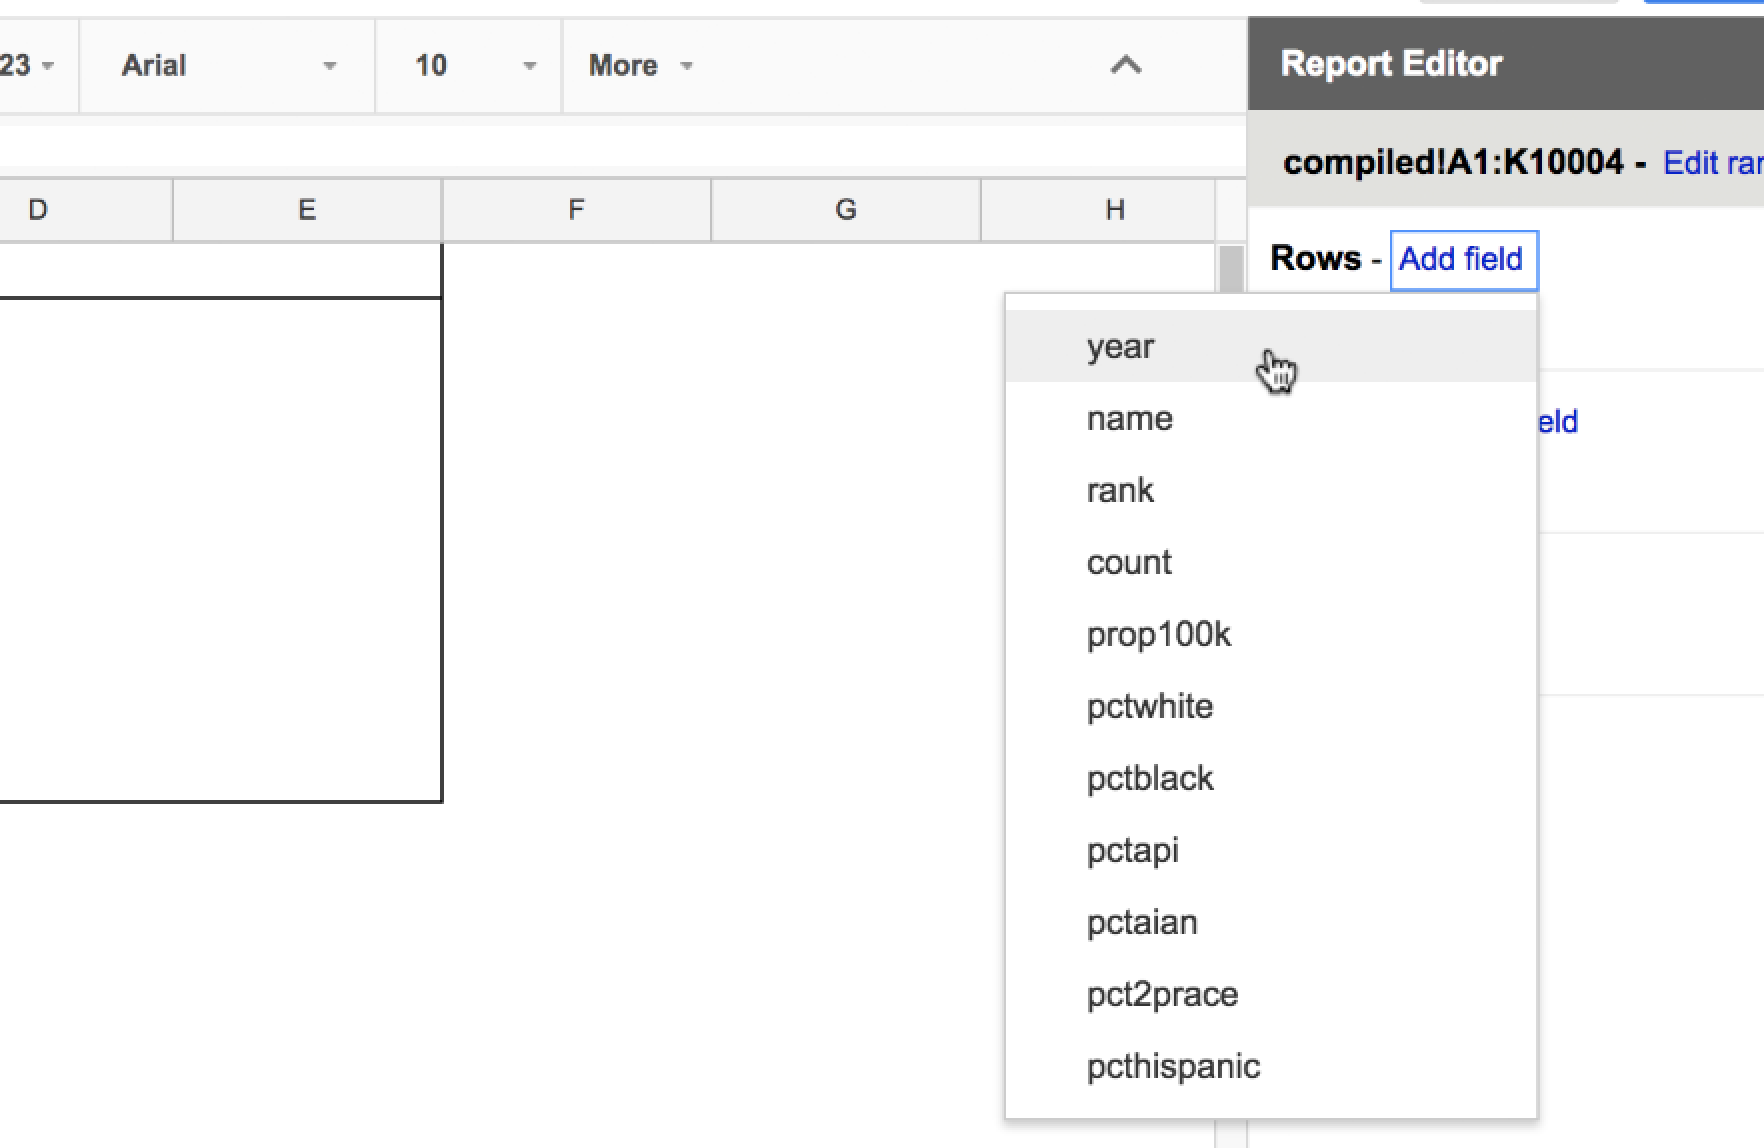 ../../_images/pivot-table-report-editor-add-rows-year.png